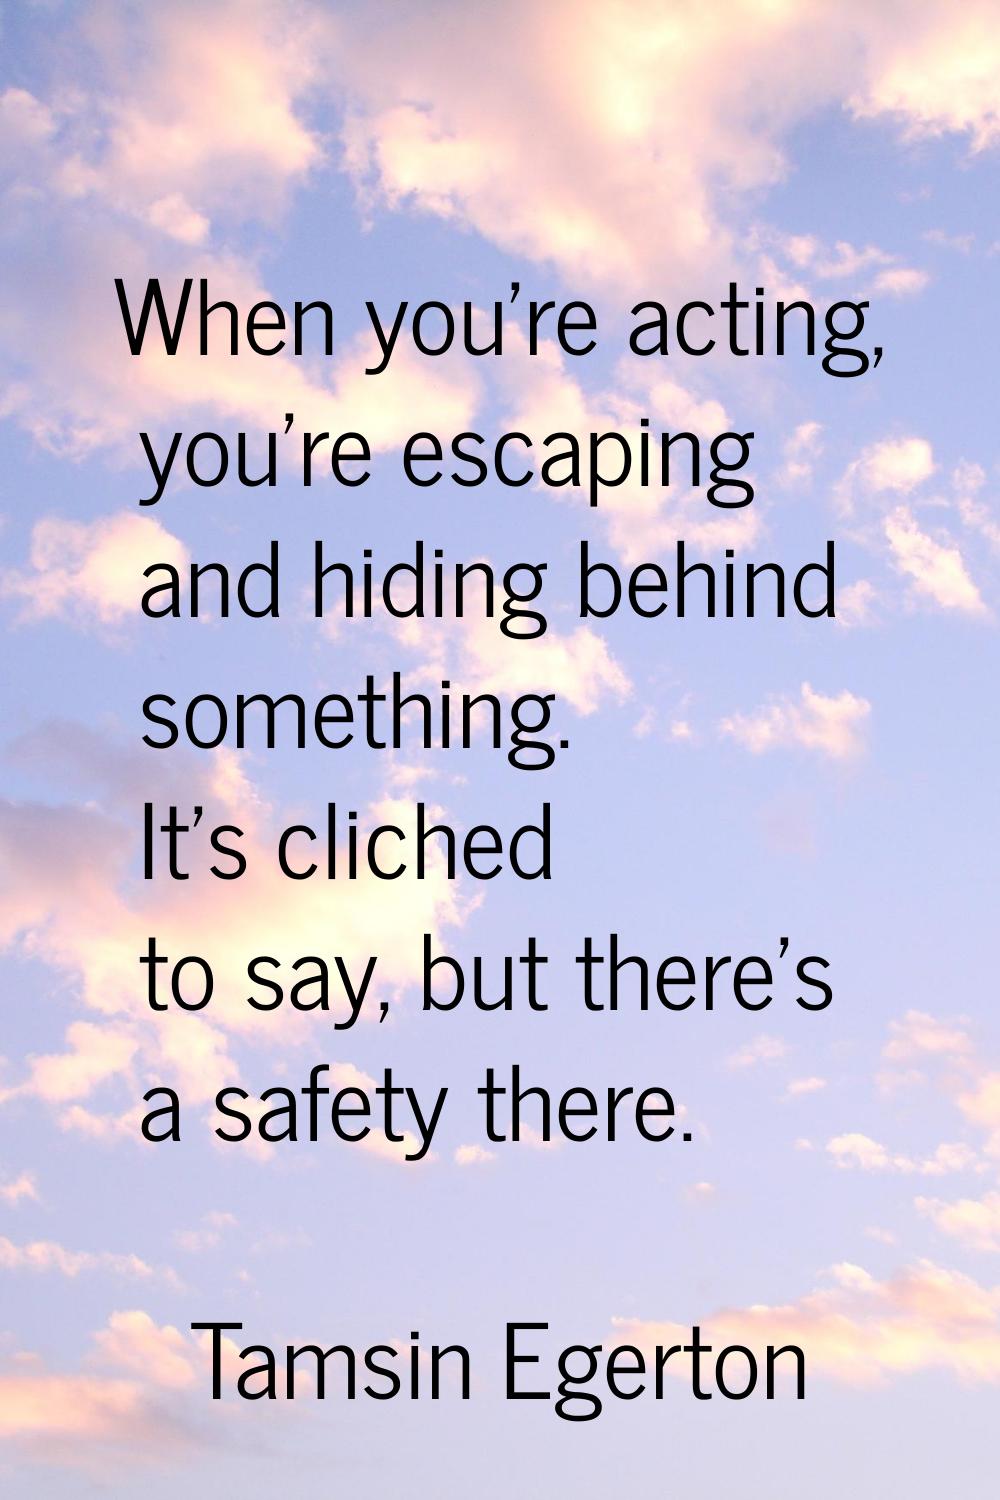 When you're acting, you're escaping and hiding behind something. It's cliched to say, but there's a